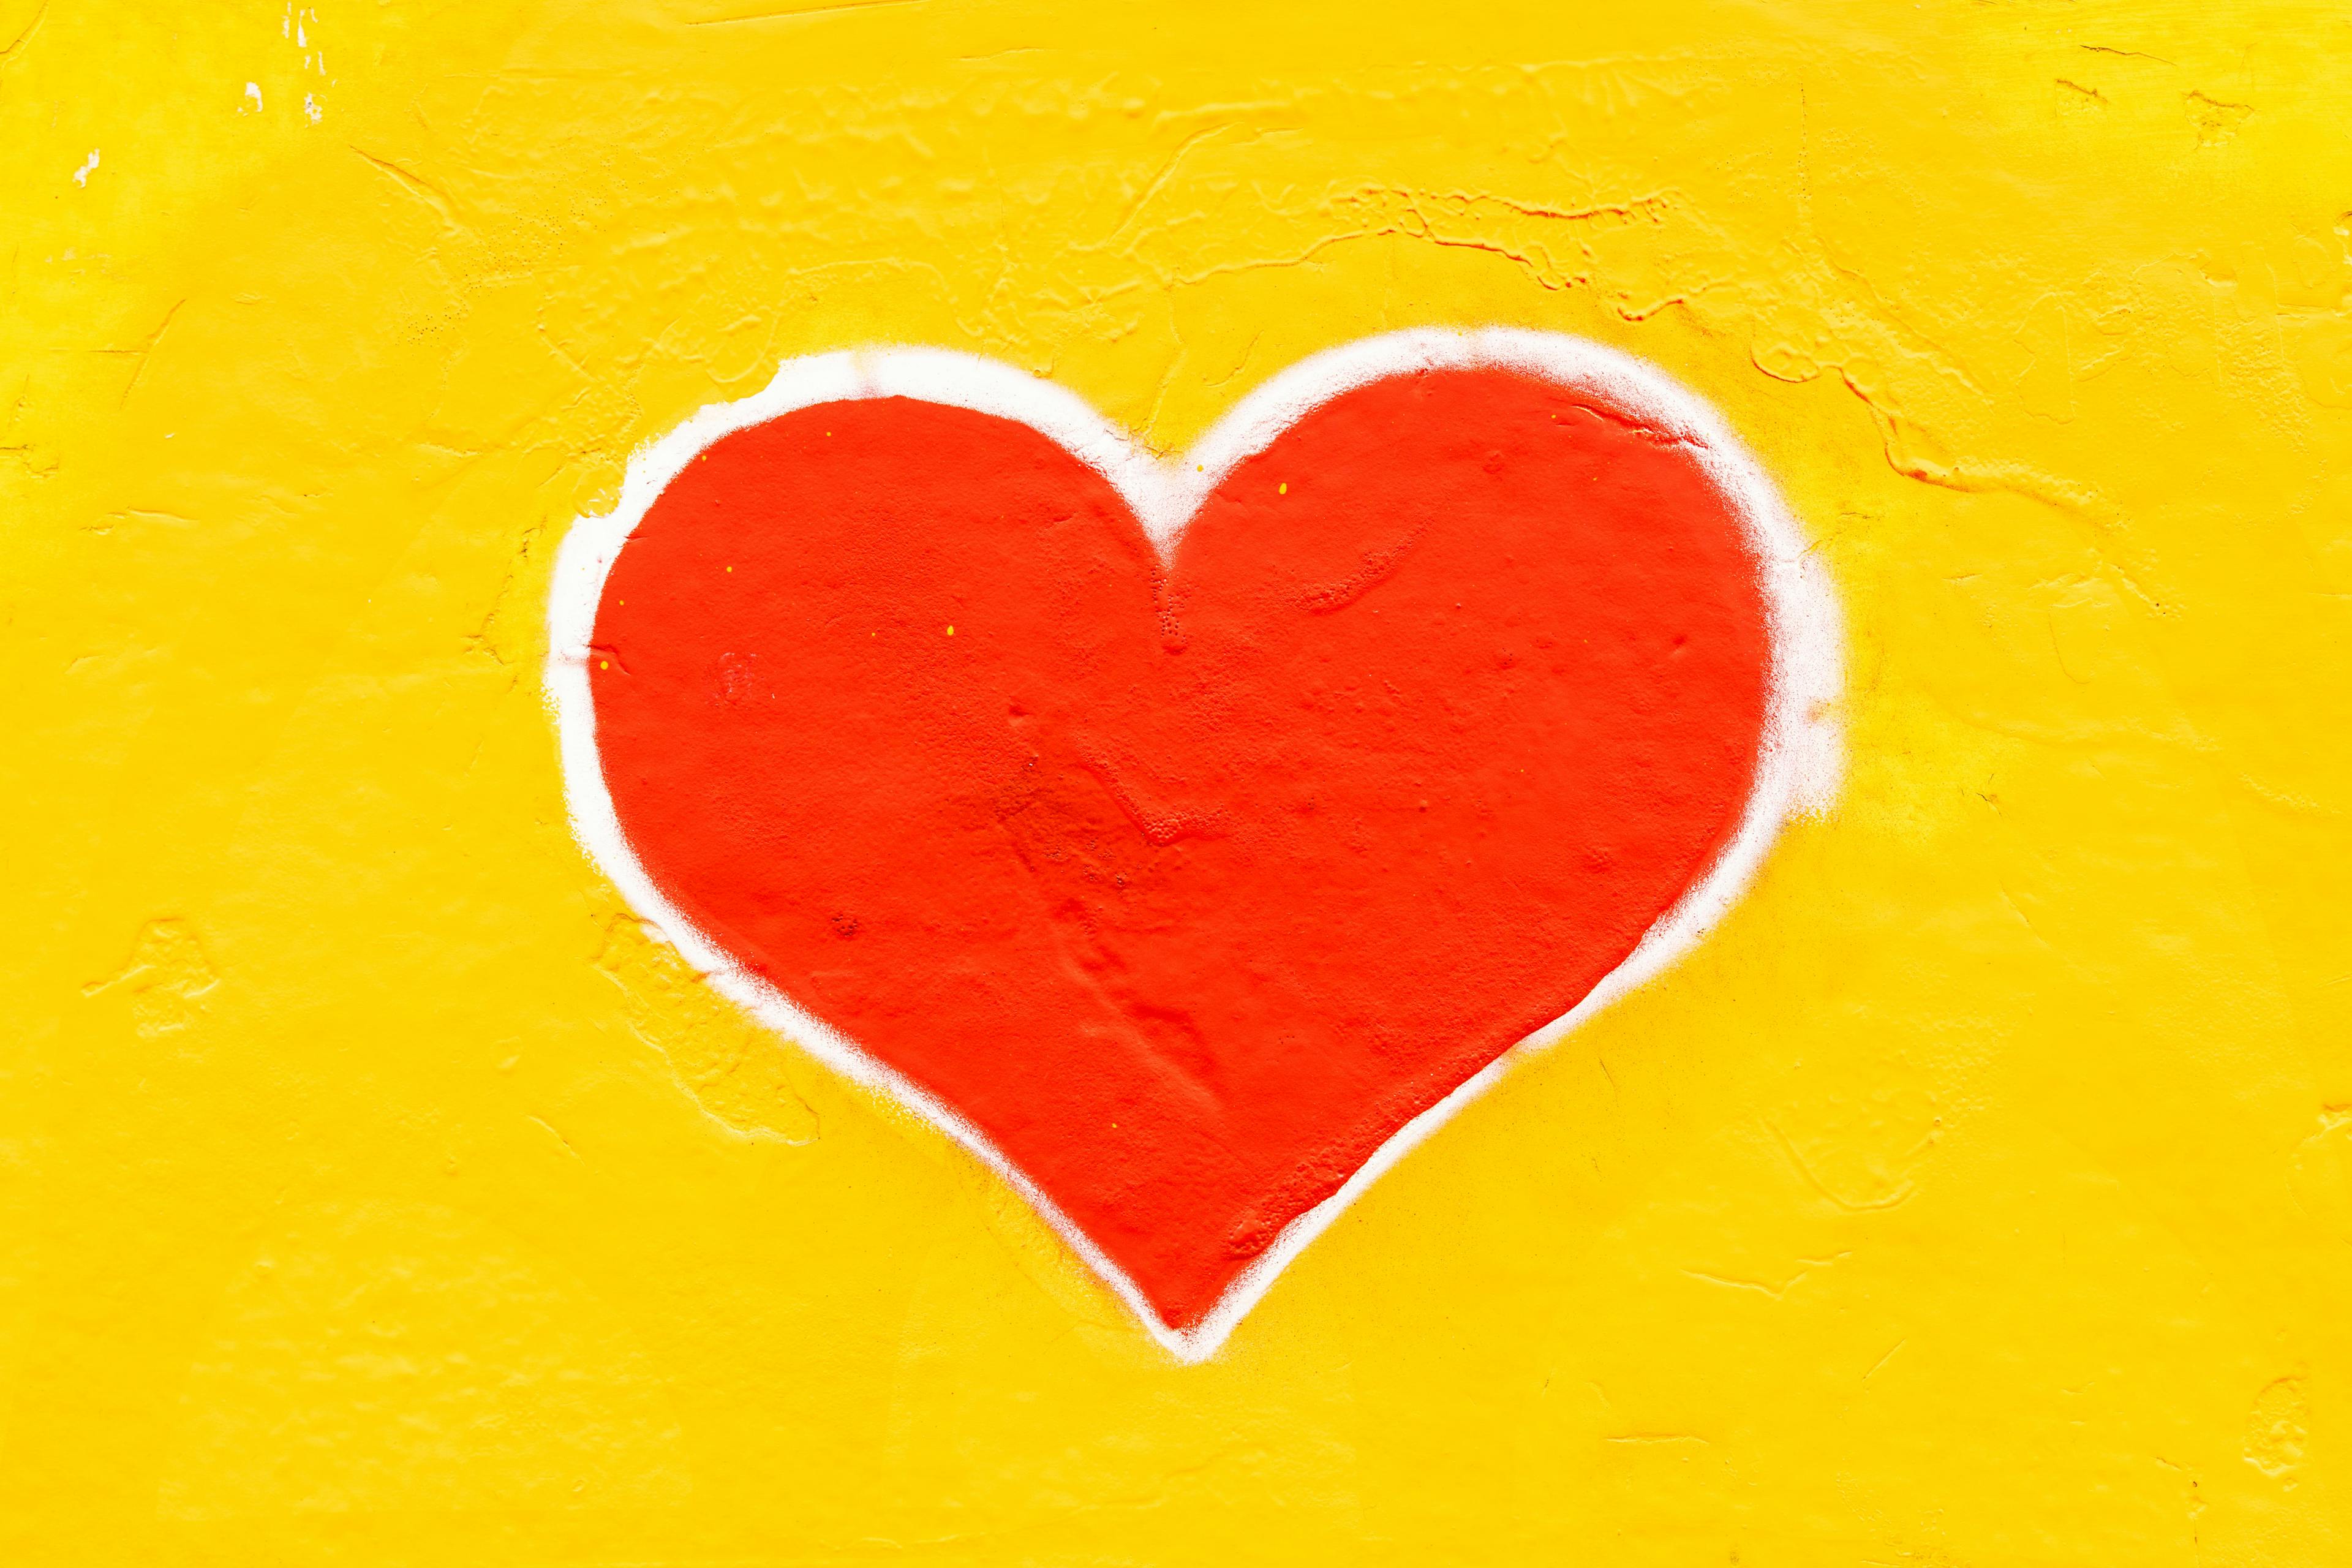 Red heart with a yellow background